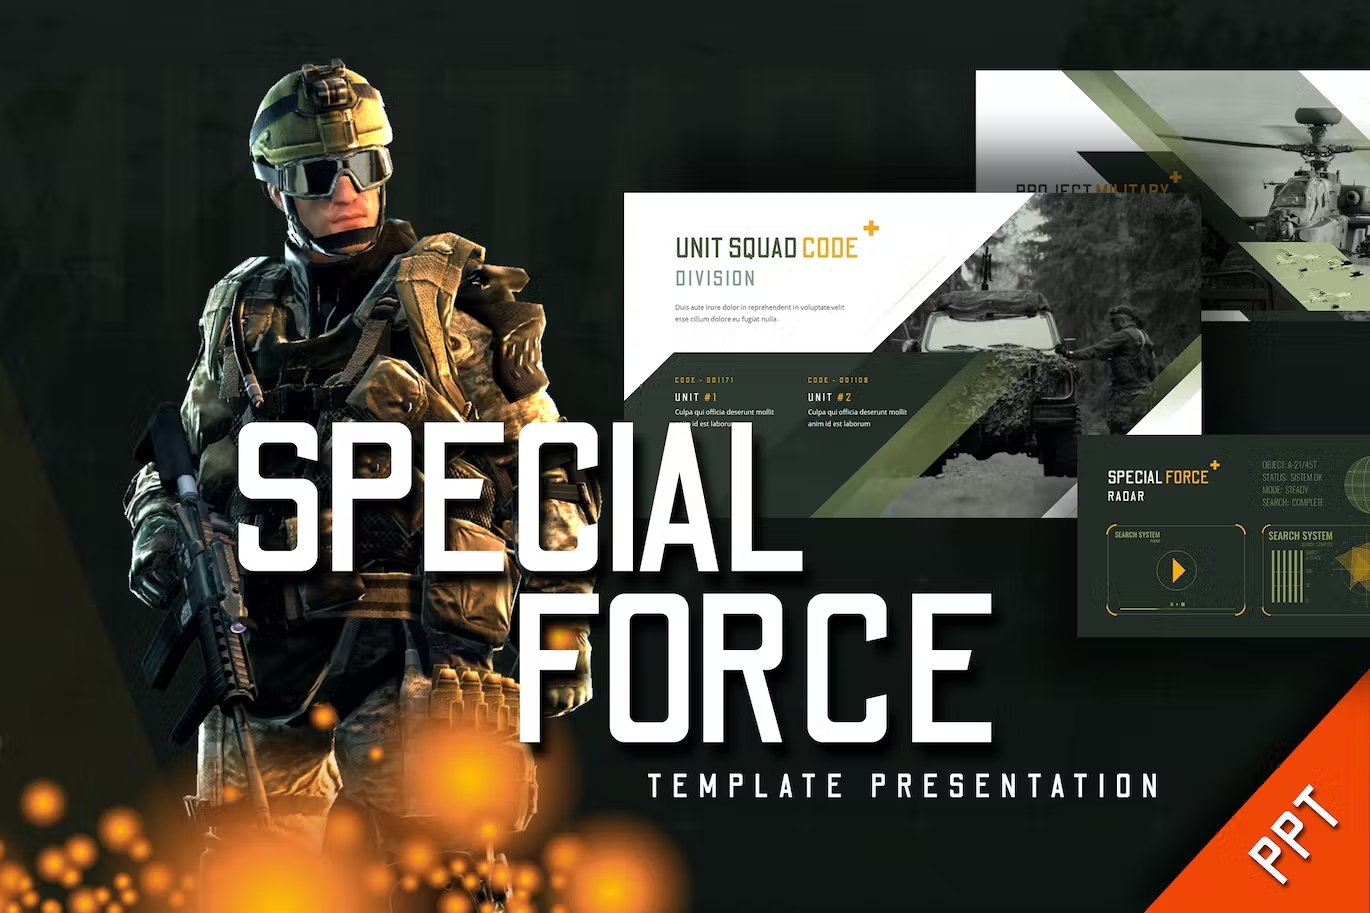 Cover - white lettering "Special Force Template Presentation" and special force image with different presentation templates on a dark green background.